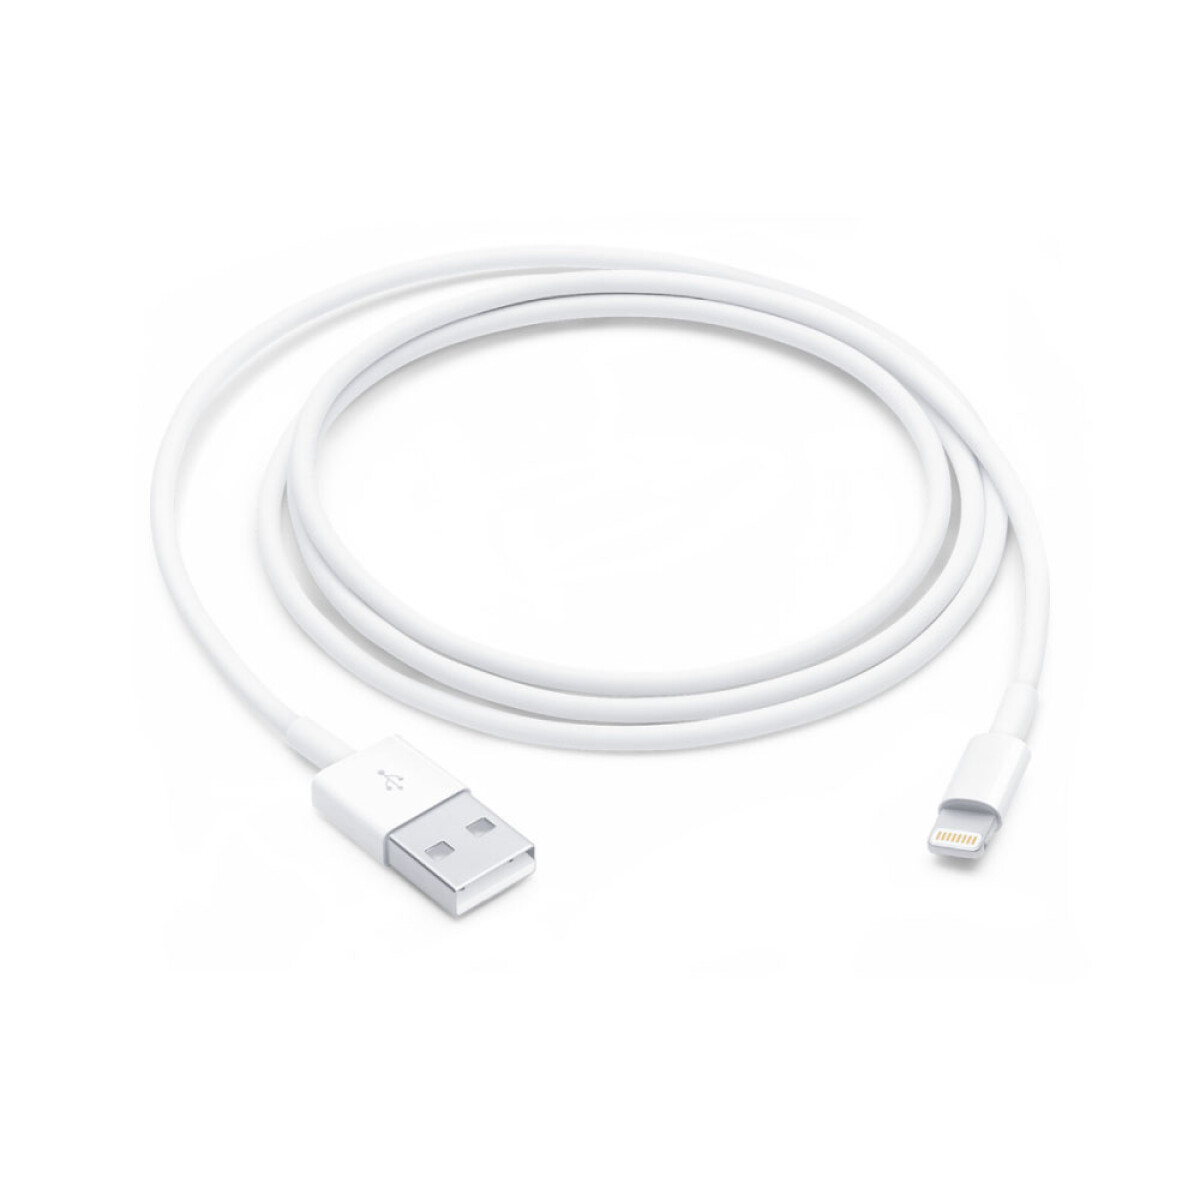 Cable 2 Metros Lightning A Usb P/ Iphone Ipad Iphone (md819zma) 